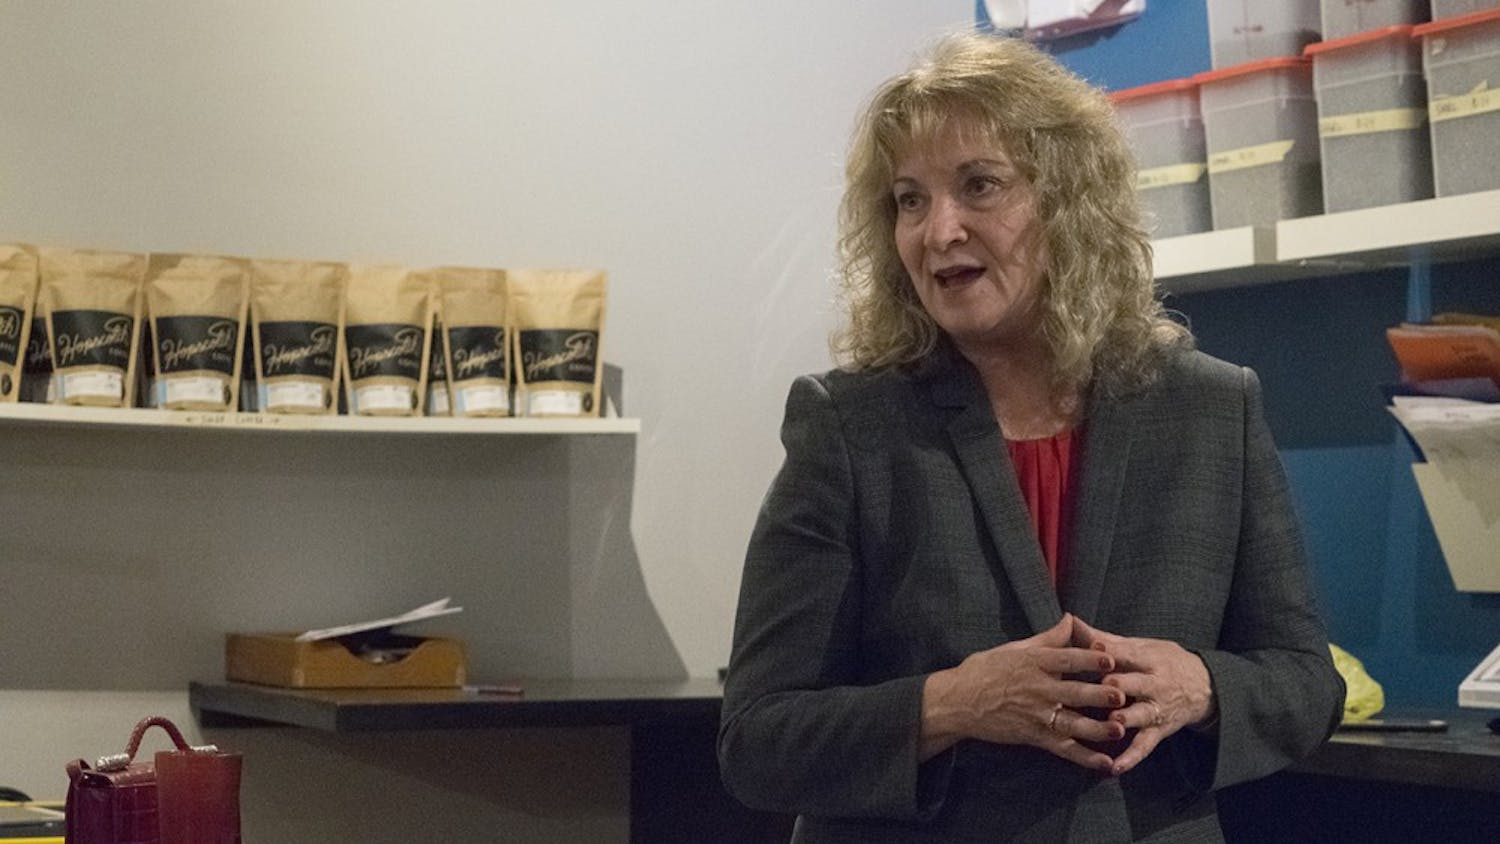 Glenda Ritz, Indiana superintendent of public instruction, speaks to a room of people at Hopscotch Coffee Monday evening about her 2016 campaign for re-election. Ritz spoke about what she has accomplished during the past 4 years and what remains to be done in Indiana education.